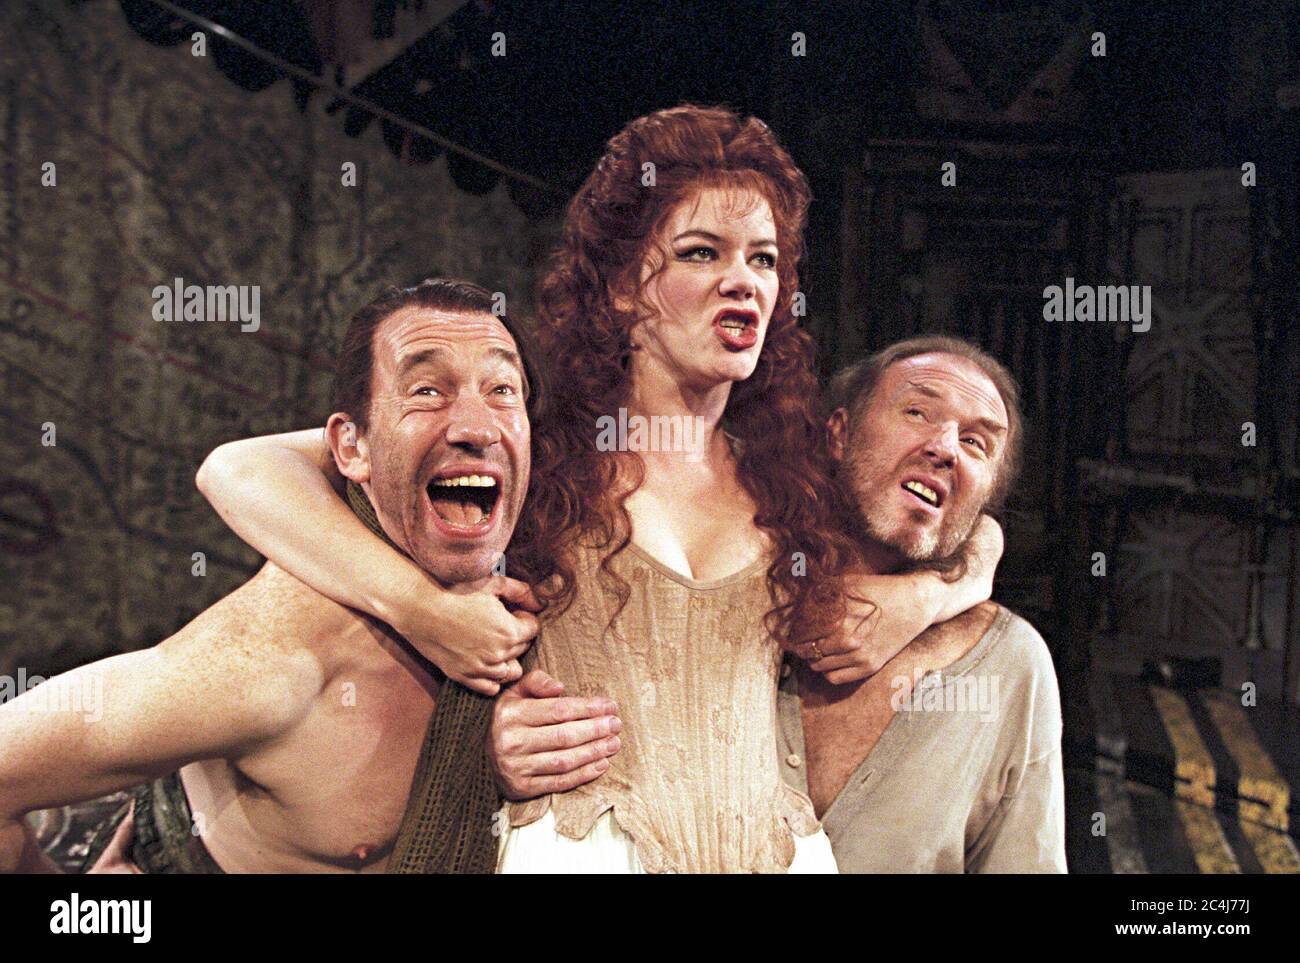 l-r: Simon Callow (Face), Josie Lawrence (Doll Common), Tim Pigott-Smith (Subtle) in THE ALCHEMIST by Ben Jonson at the Birmingham Rep, Birmingham, England  16/09/1996 a Birmingham Repertory Theatre co-production with the National Theatre (NT), London  director: Bill Alexander Stock Photo